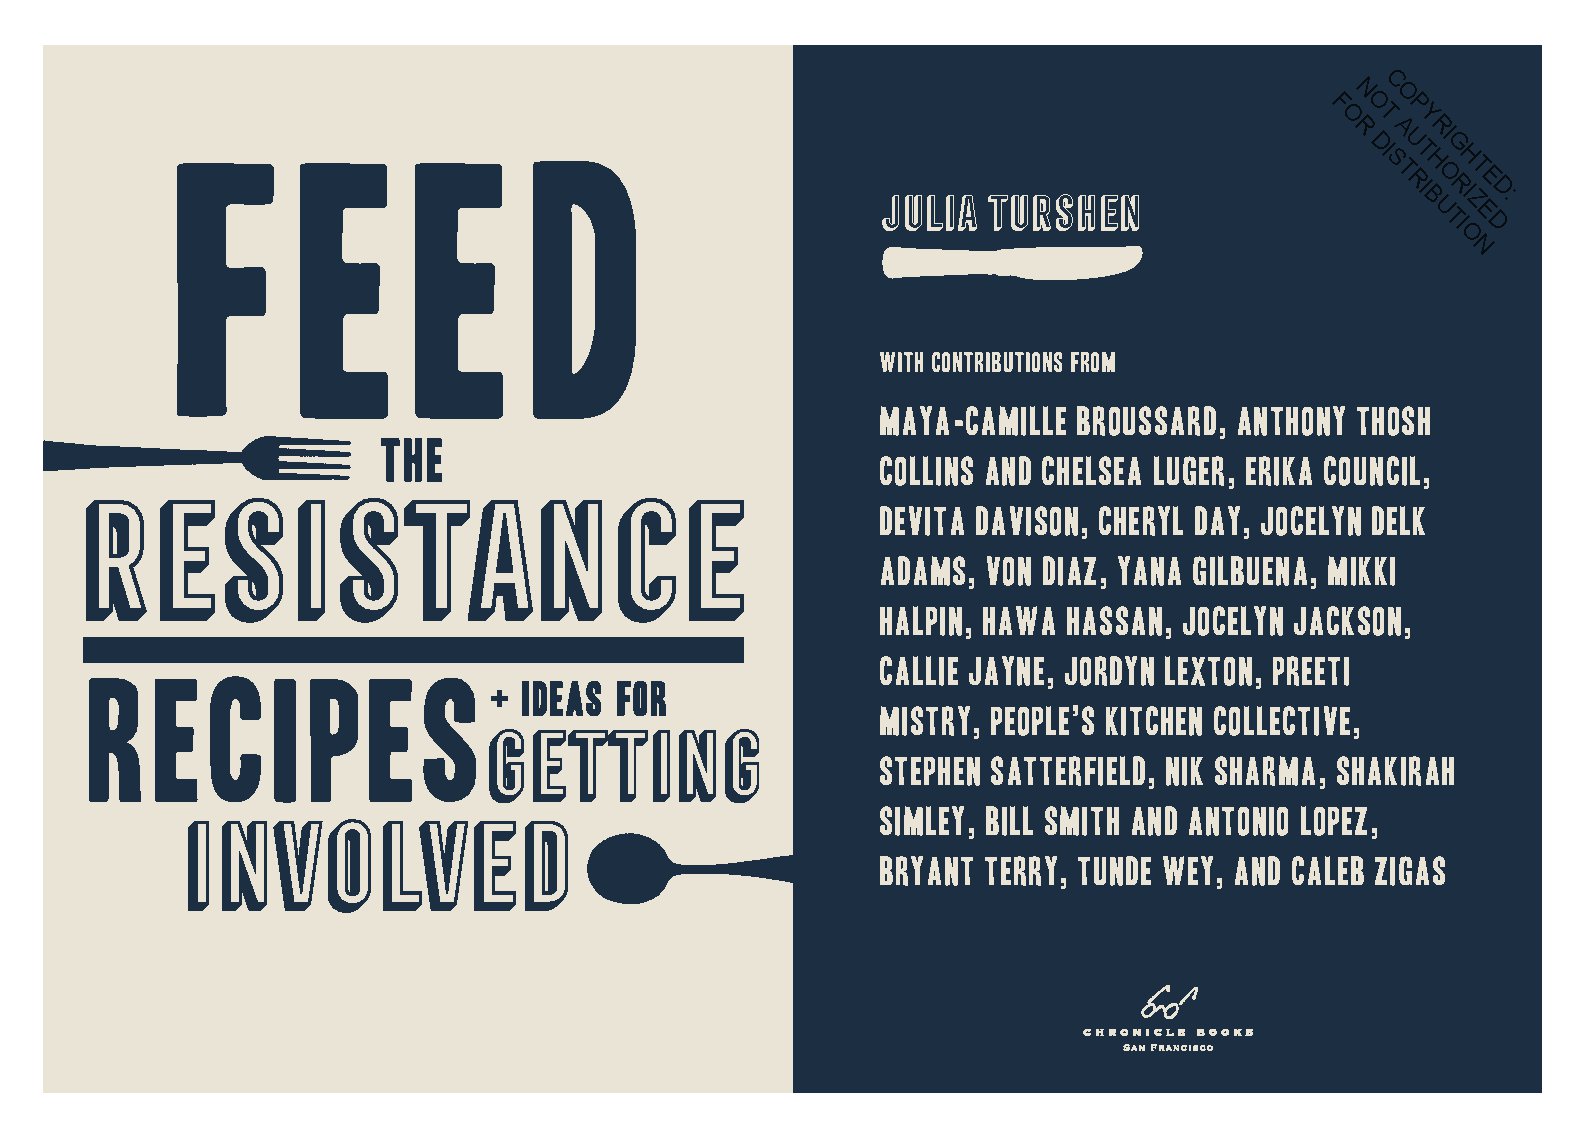 Feed the Resistance